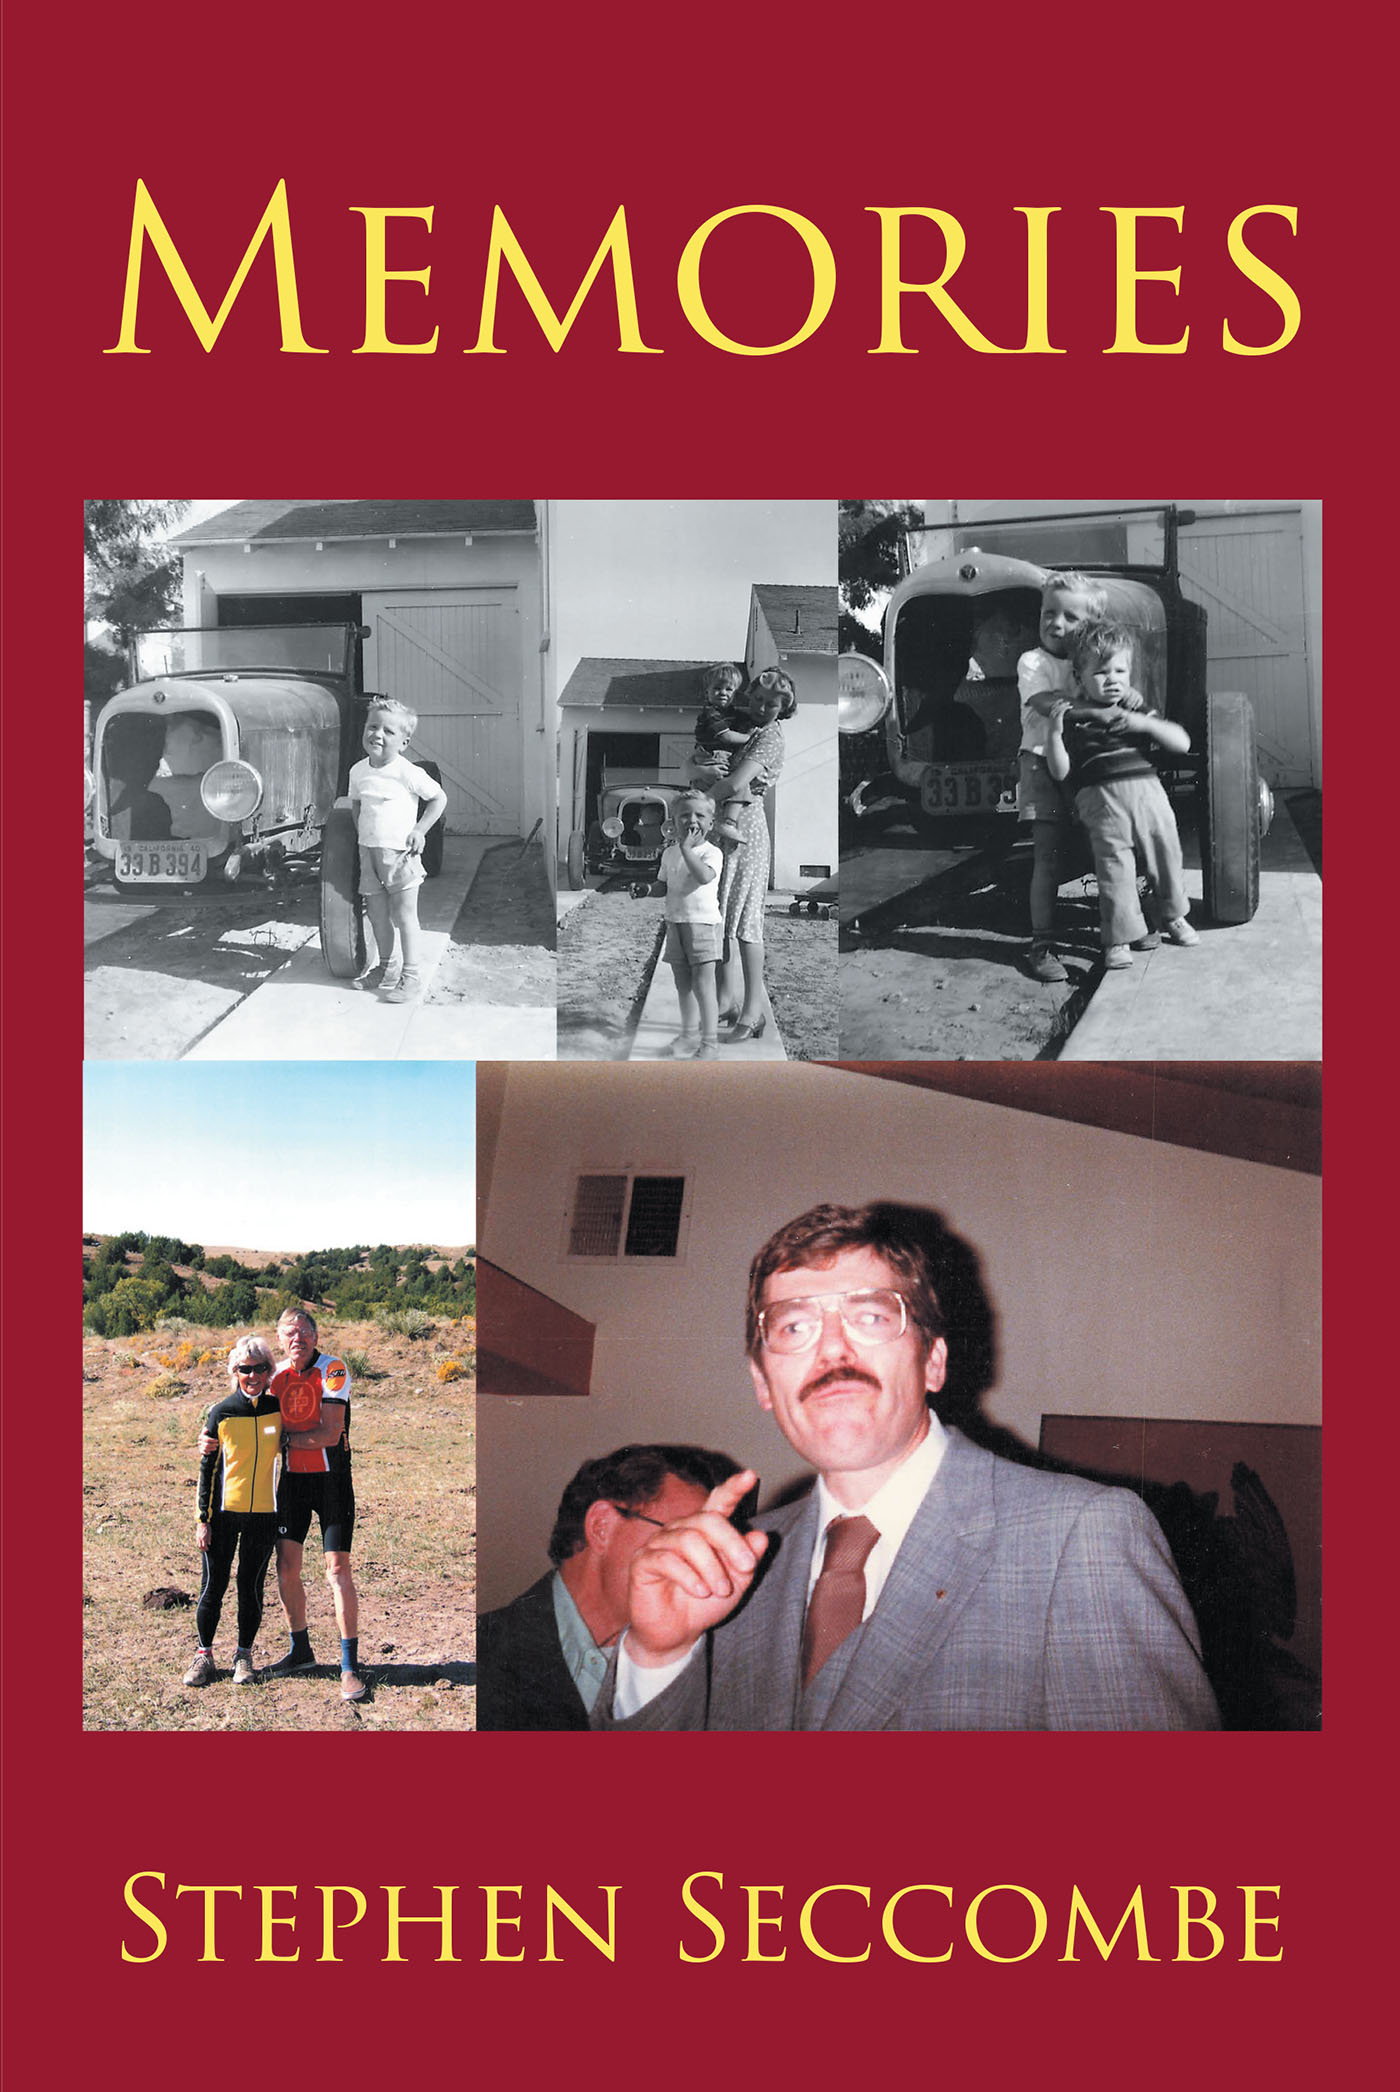 Stephen Seccombe’s New Book, "Memories," is a Fascinating Collection of Standout Moments and Experiences from the Author’s Long and Storied Life